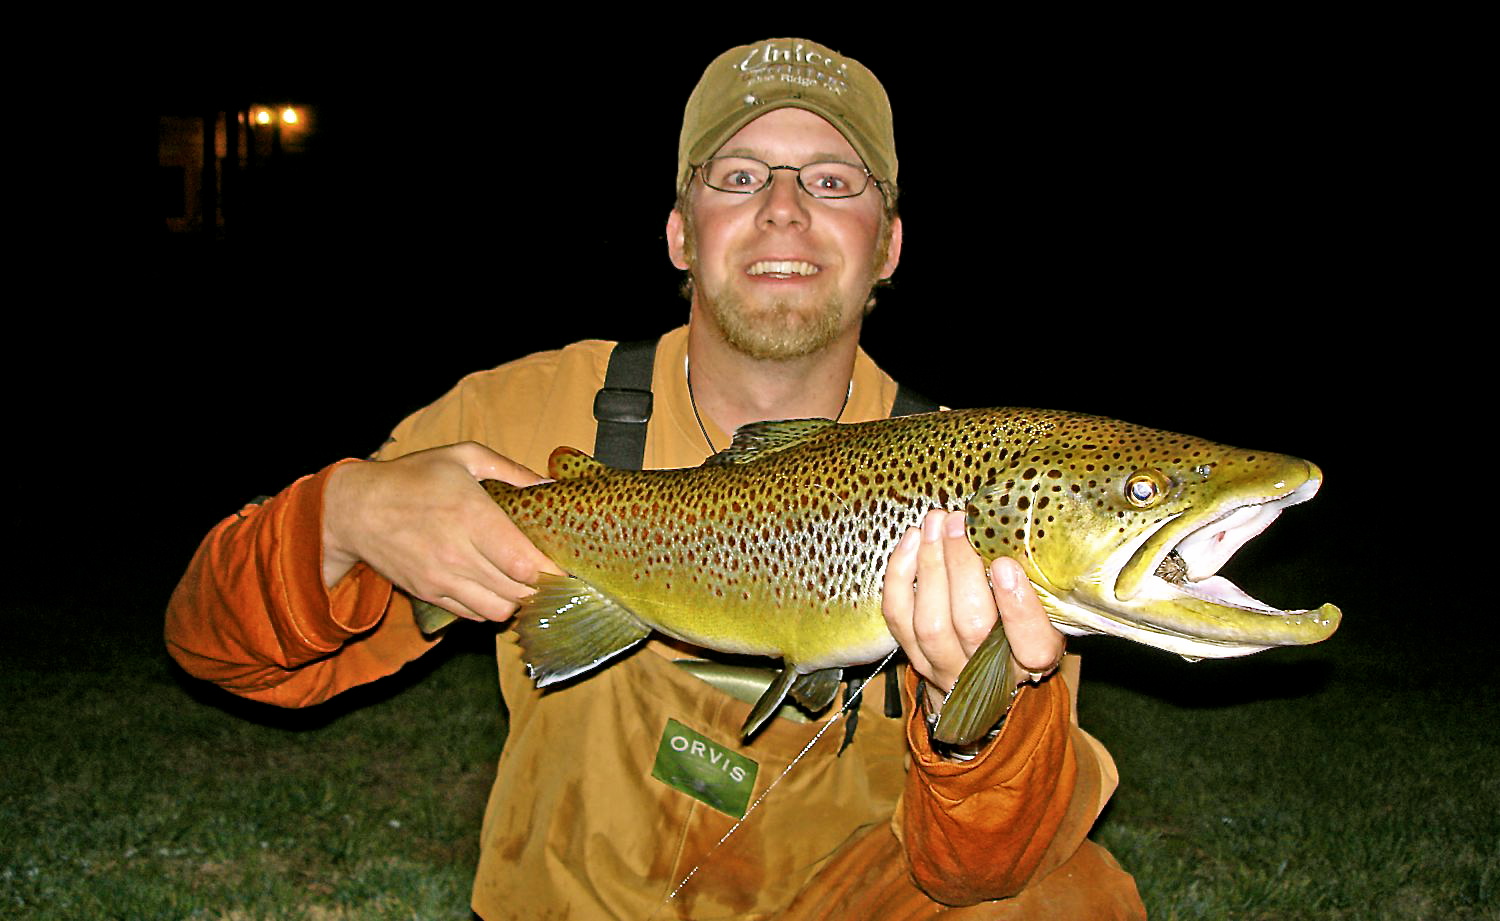 https://www.ginkandgasoline.com/wp-content/uploads/2012/03/brown-trout-mouse-pattern.jpg